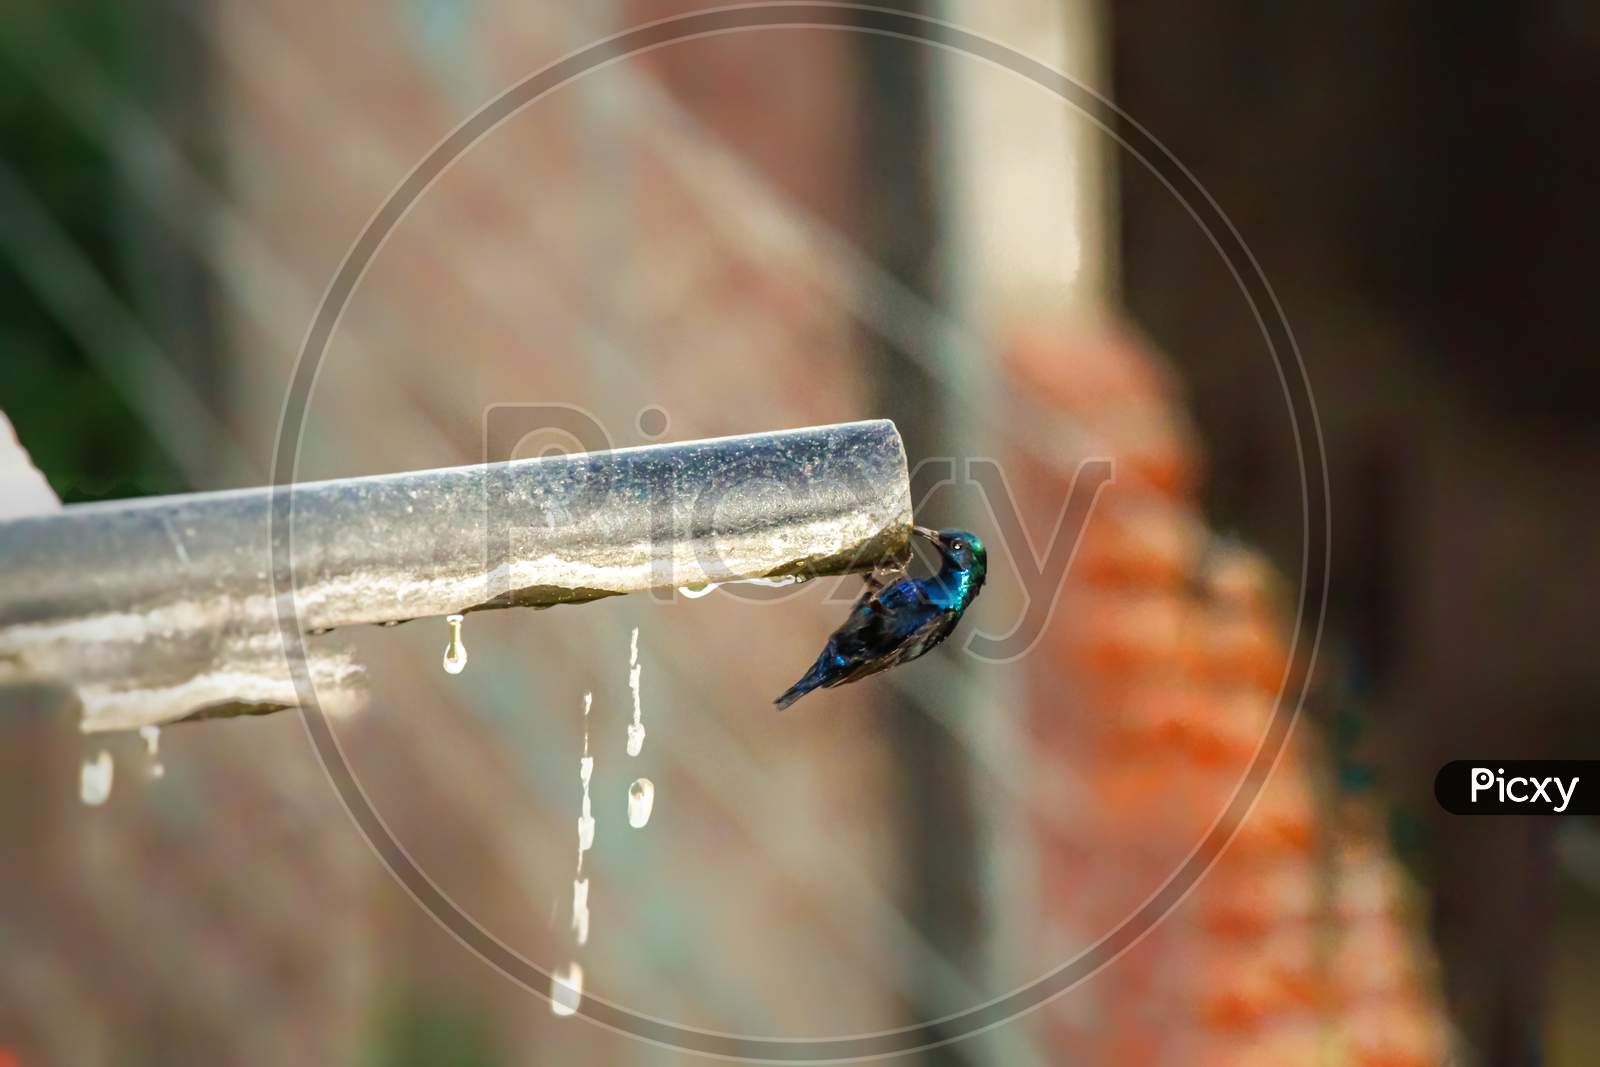 A humming bird drinking water from pipe